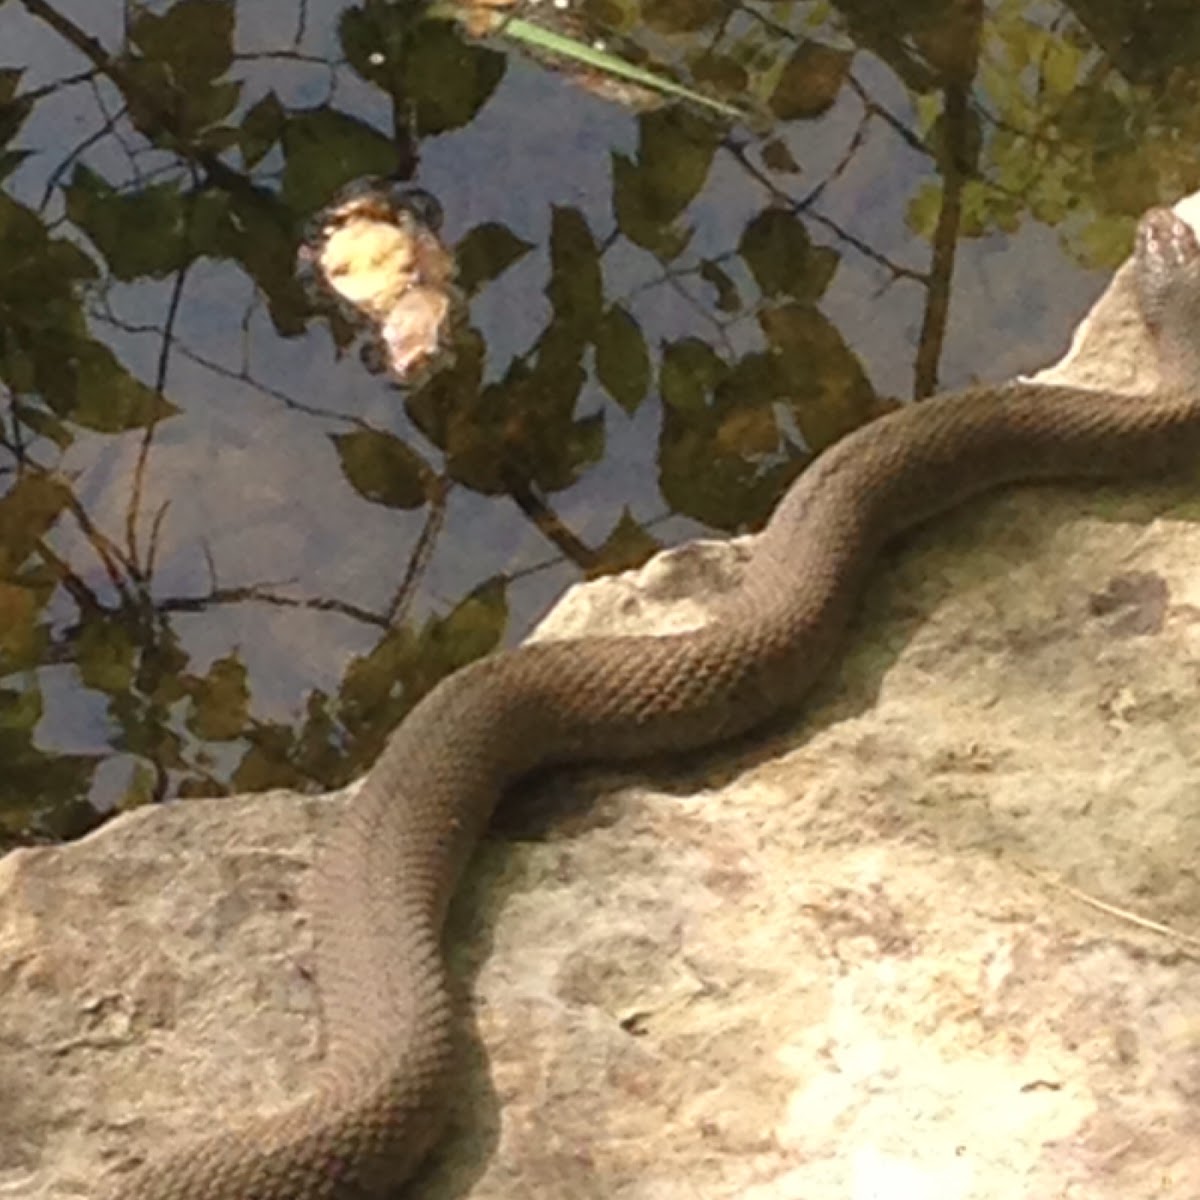 Northern water snake